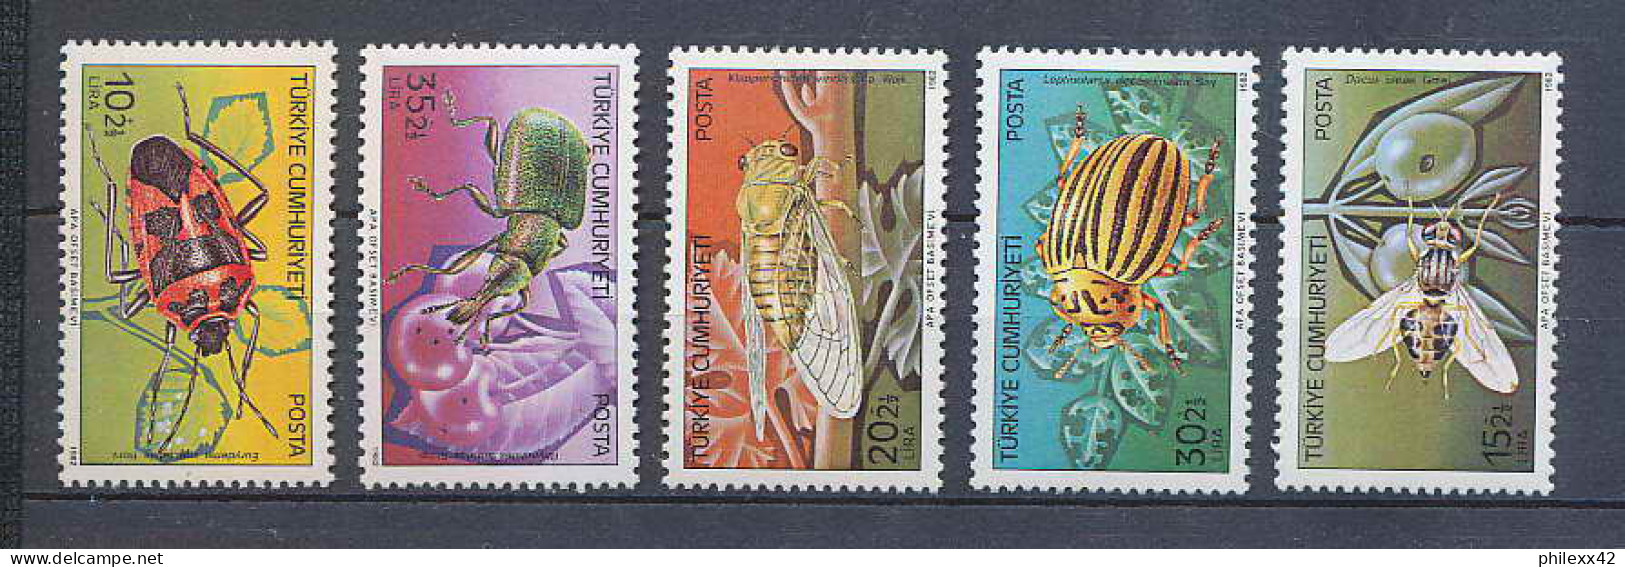 Turquie (Turkey) - 98 - N° 2370/74 Insectes (insects) COTE 5 Neuf ** Mnh - Ungebraucht